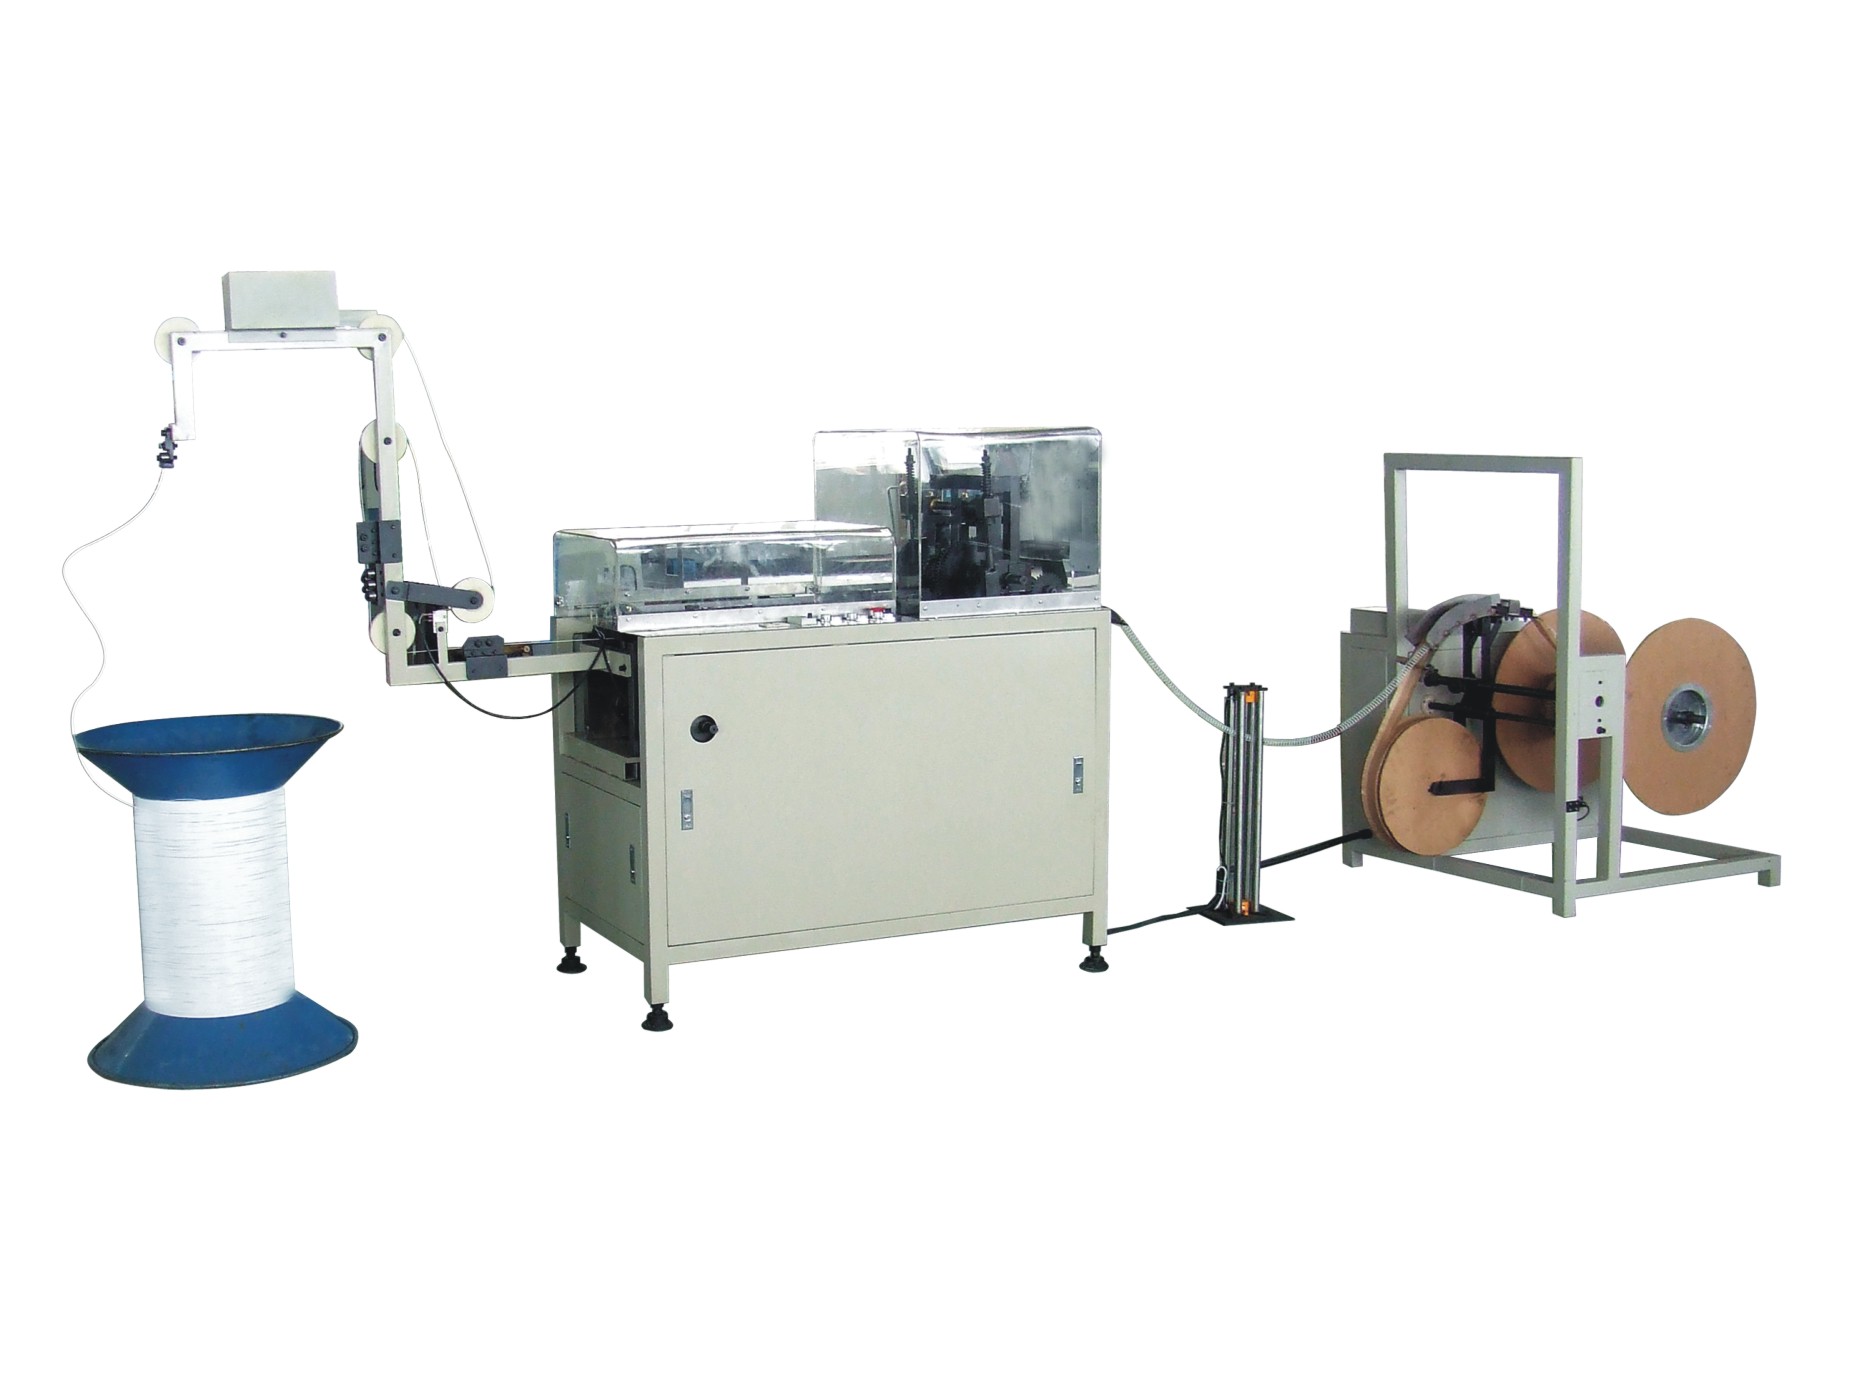 Double-wire forming machine